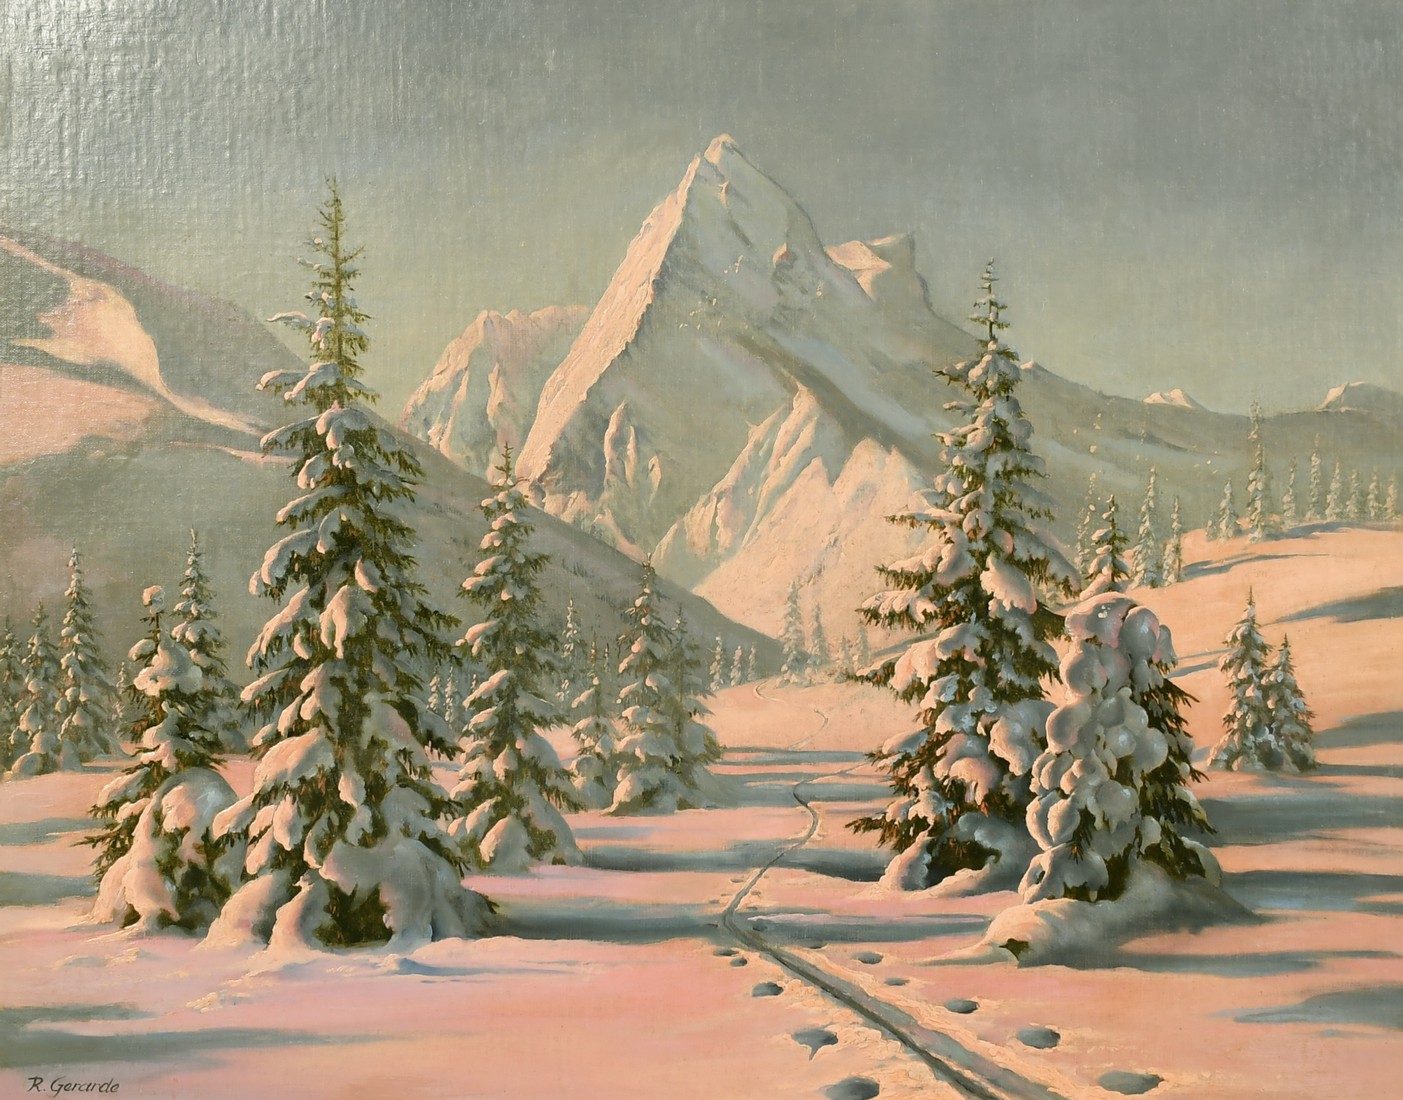 R. Gerarde, Continental School Circa 1900, a Tyrolean view at dusk with tracks in the snow, oil on